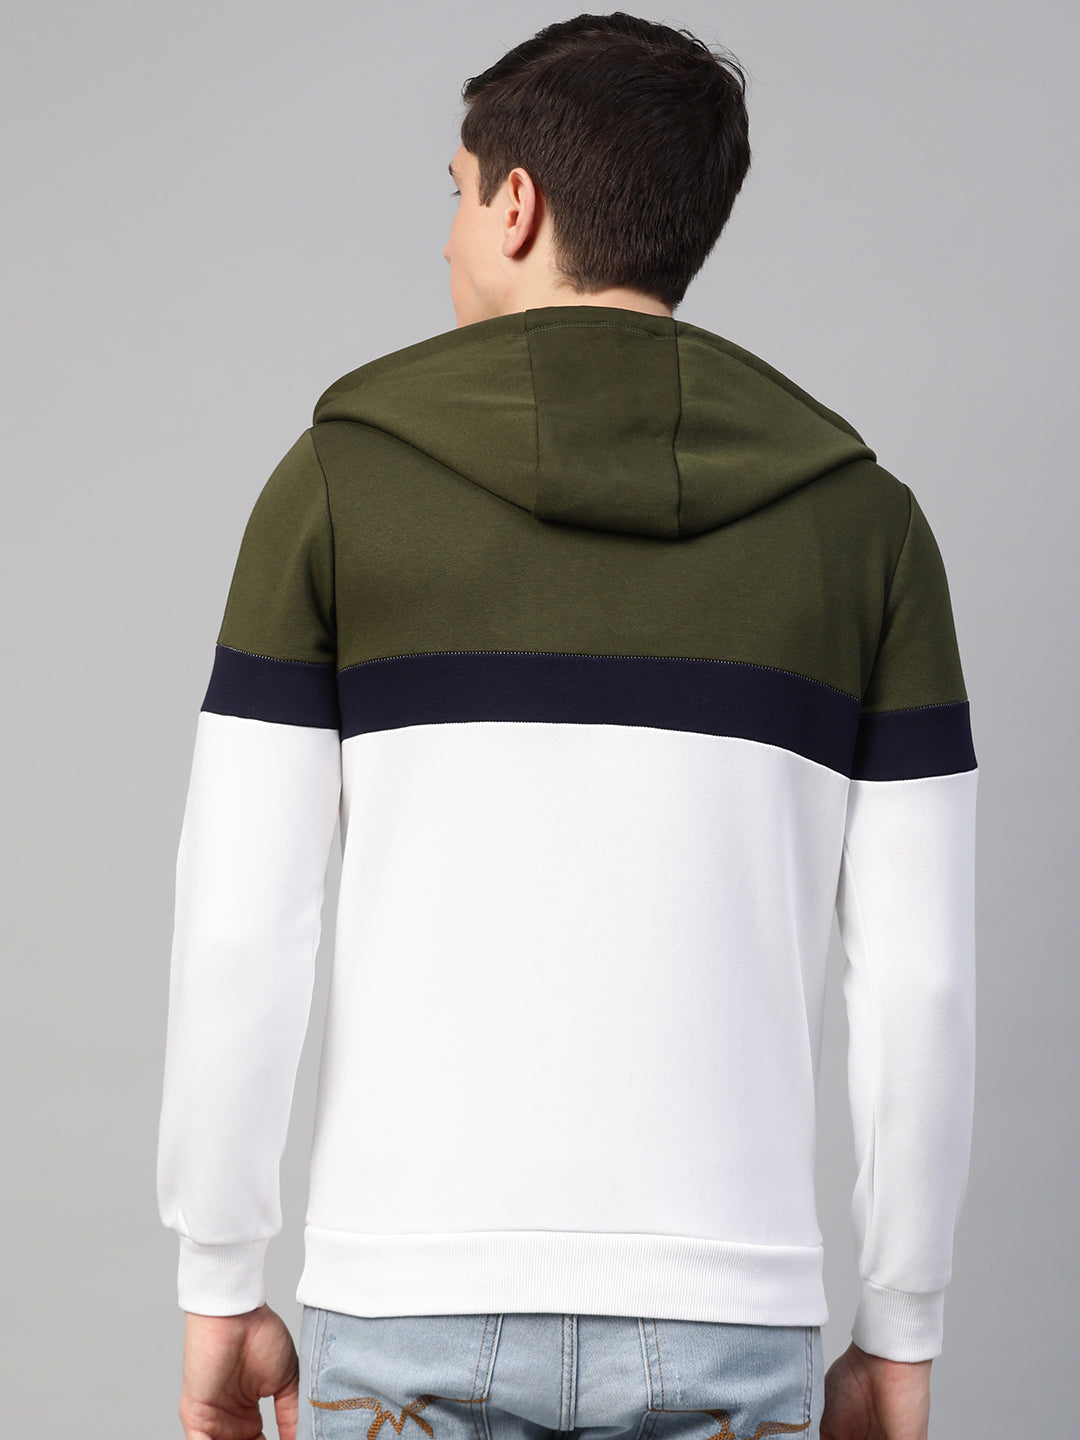 Underjeans By Spykar Olive Cotton Solid Hooded Sweatshirts-Sweatshirts-UnderJeans By Spykar